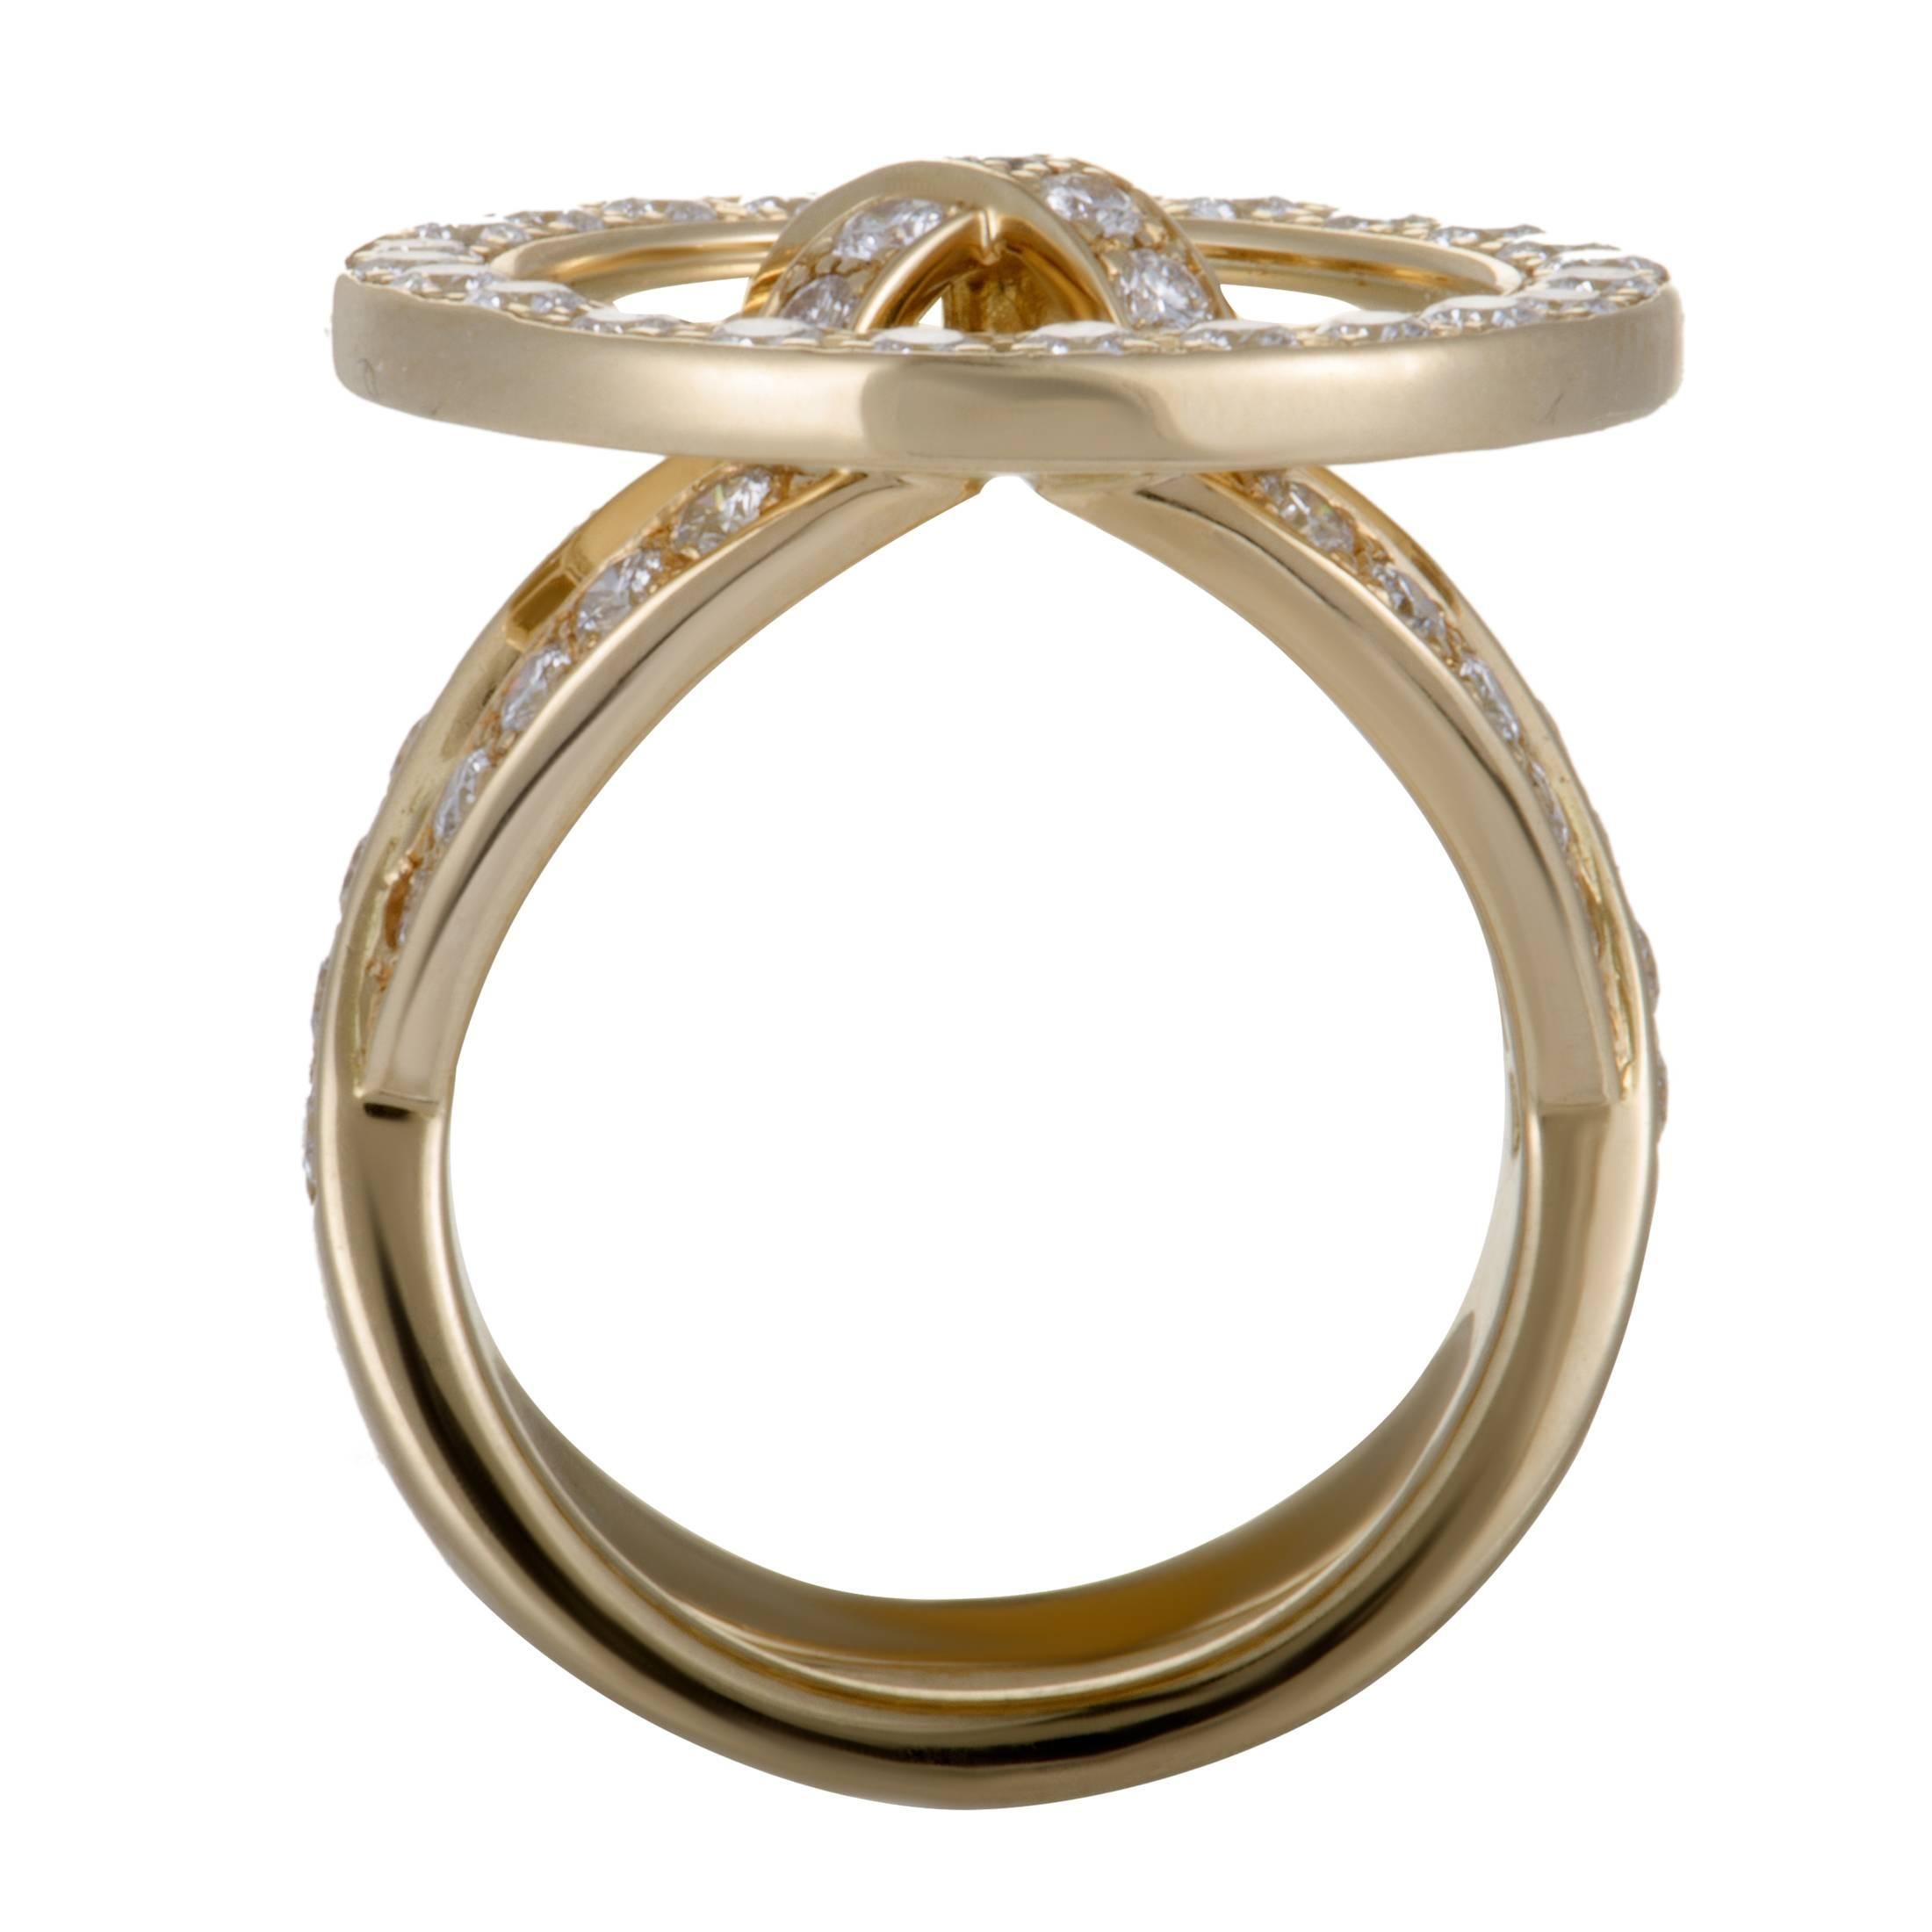 Impeccably crafted from radiant 18K yellow gold and designed in the form of a button, this splendid Van Cleef & Arpels ring boasts an exceptionally offbeat, fashionable appeal. The ring is set with resplendently colorless (grade D) diamonds of VVS